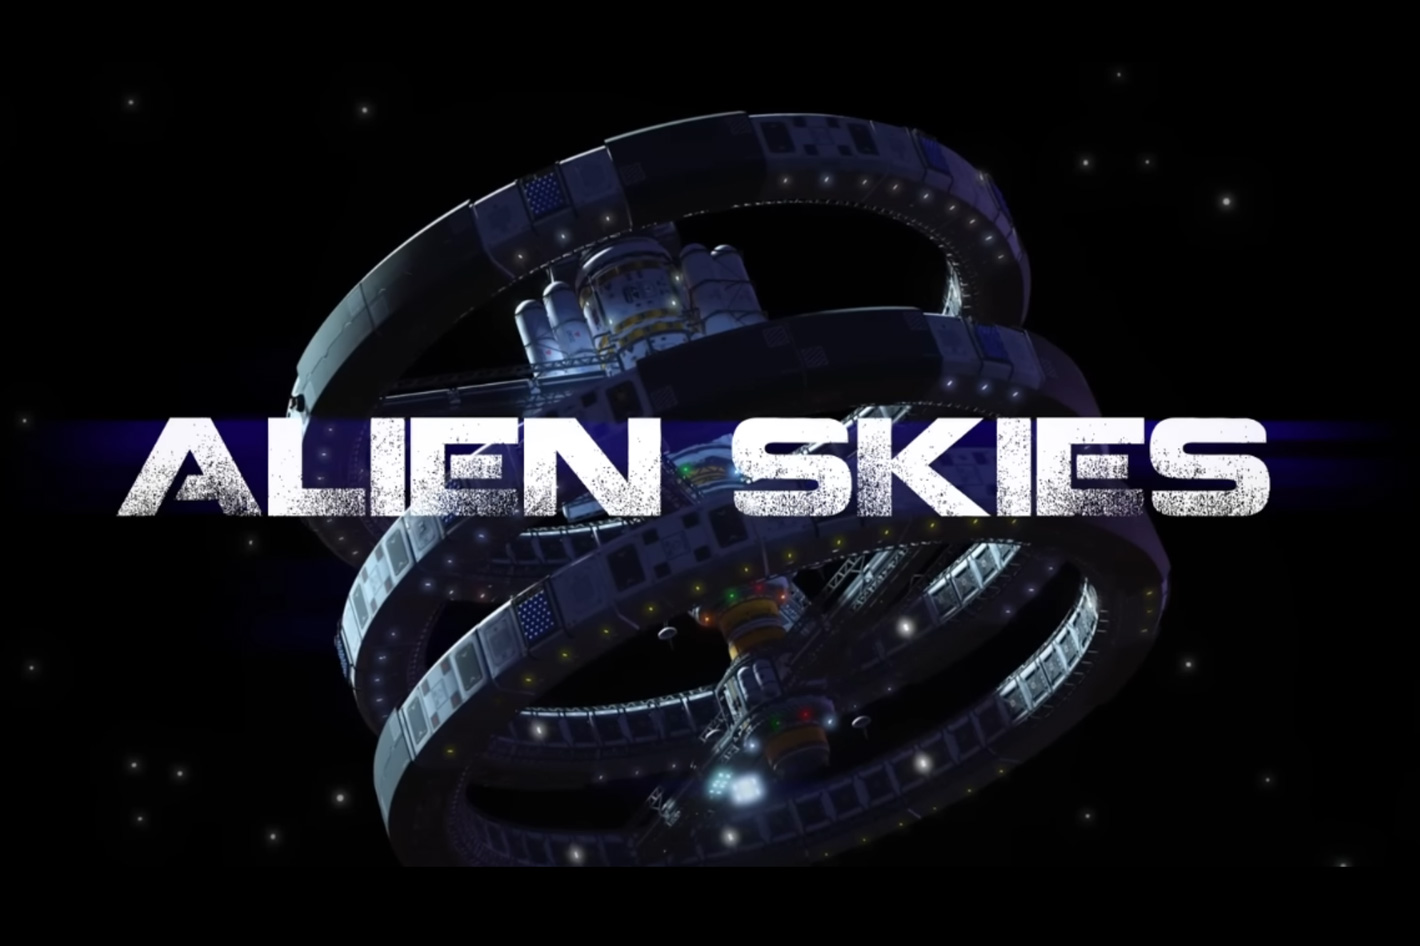 Alien Skies, an animated web series born during the pandemic